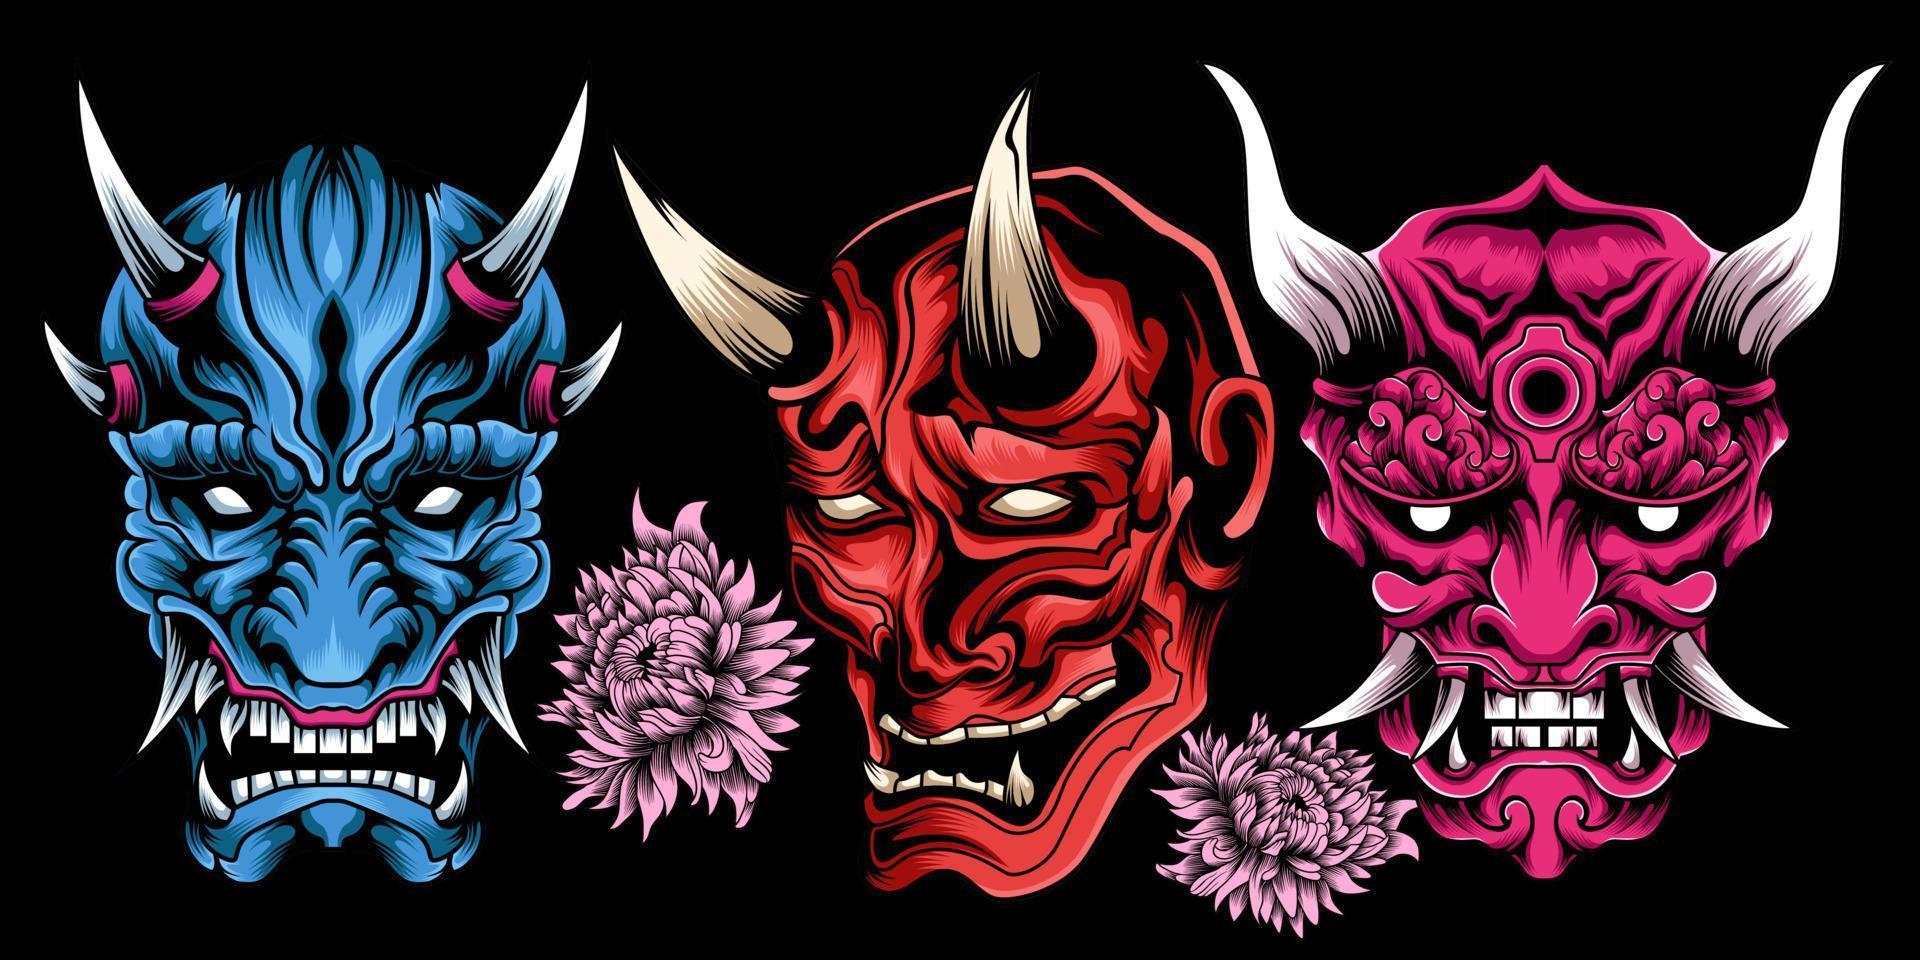 oni mask collection vector illustration